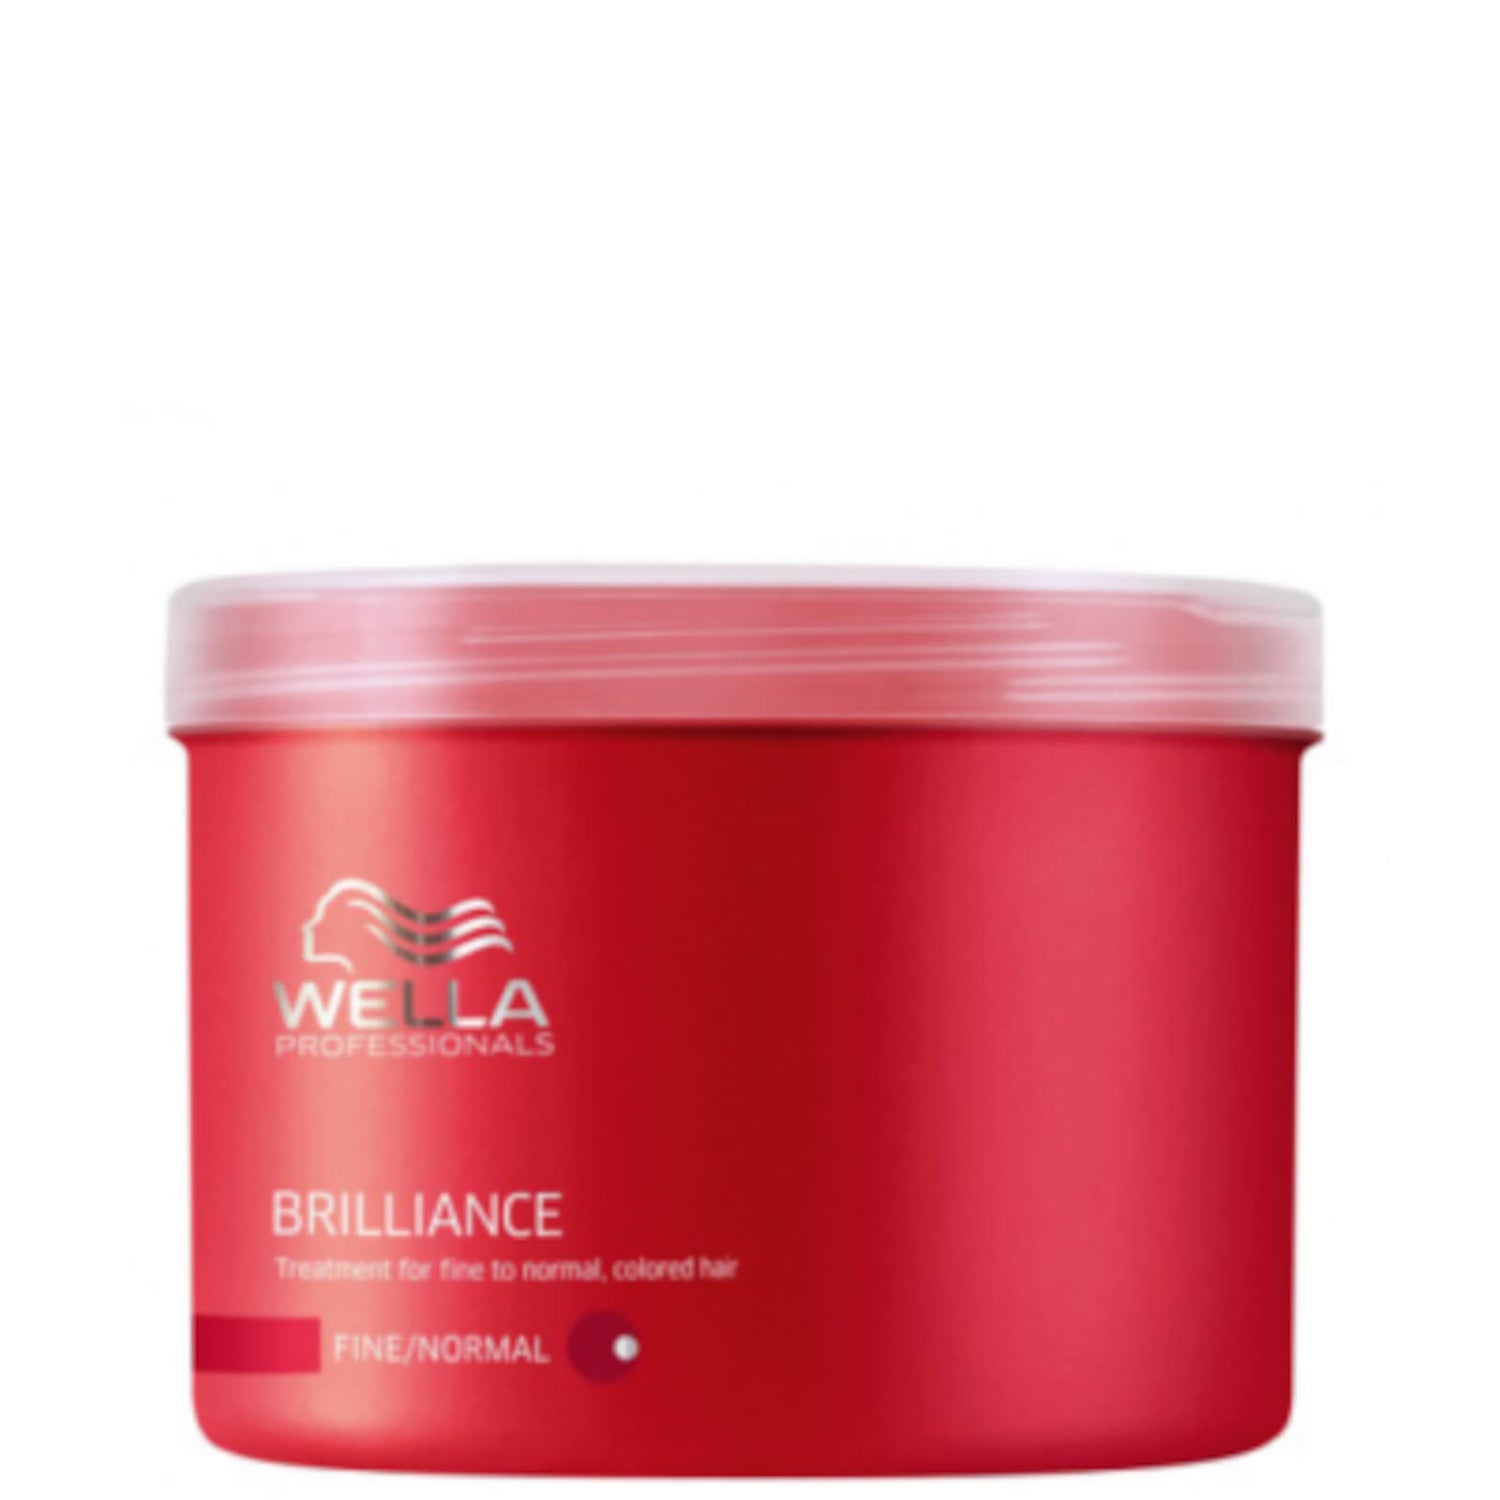 Wella Professionals Brilliance Treatment For Fine To Normal, Coloured Hair (500ml)